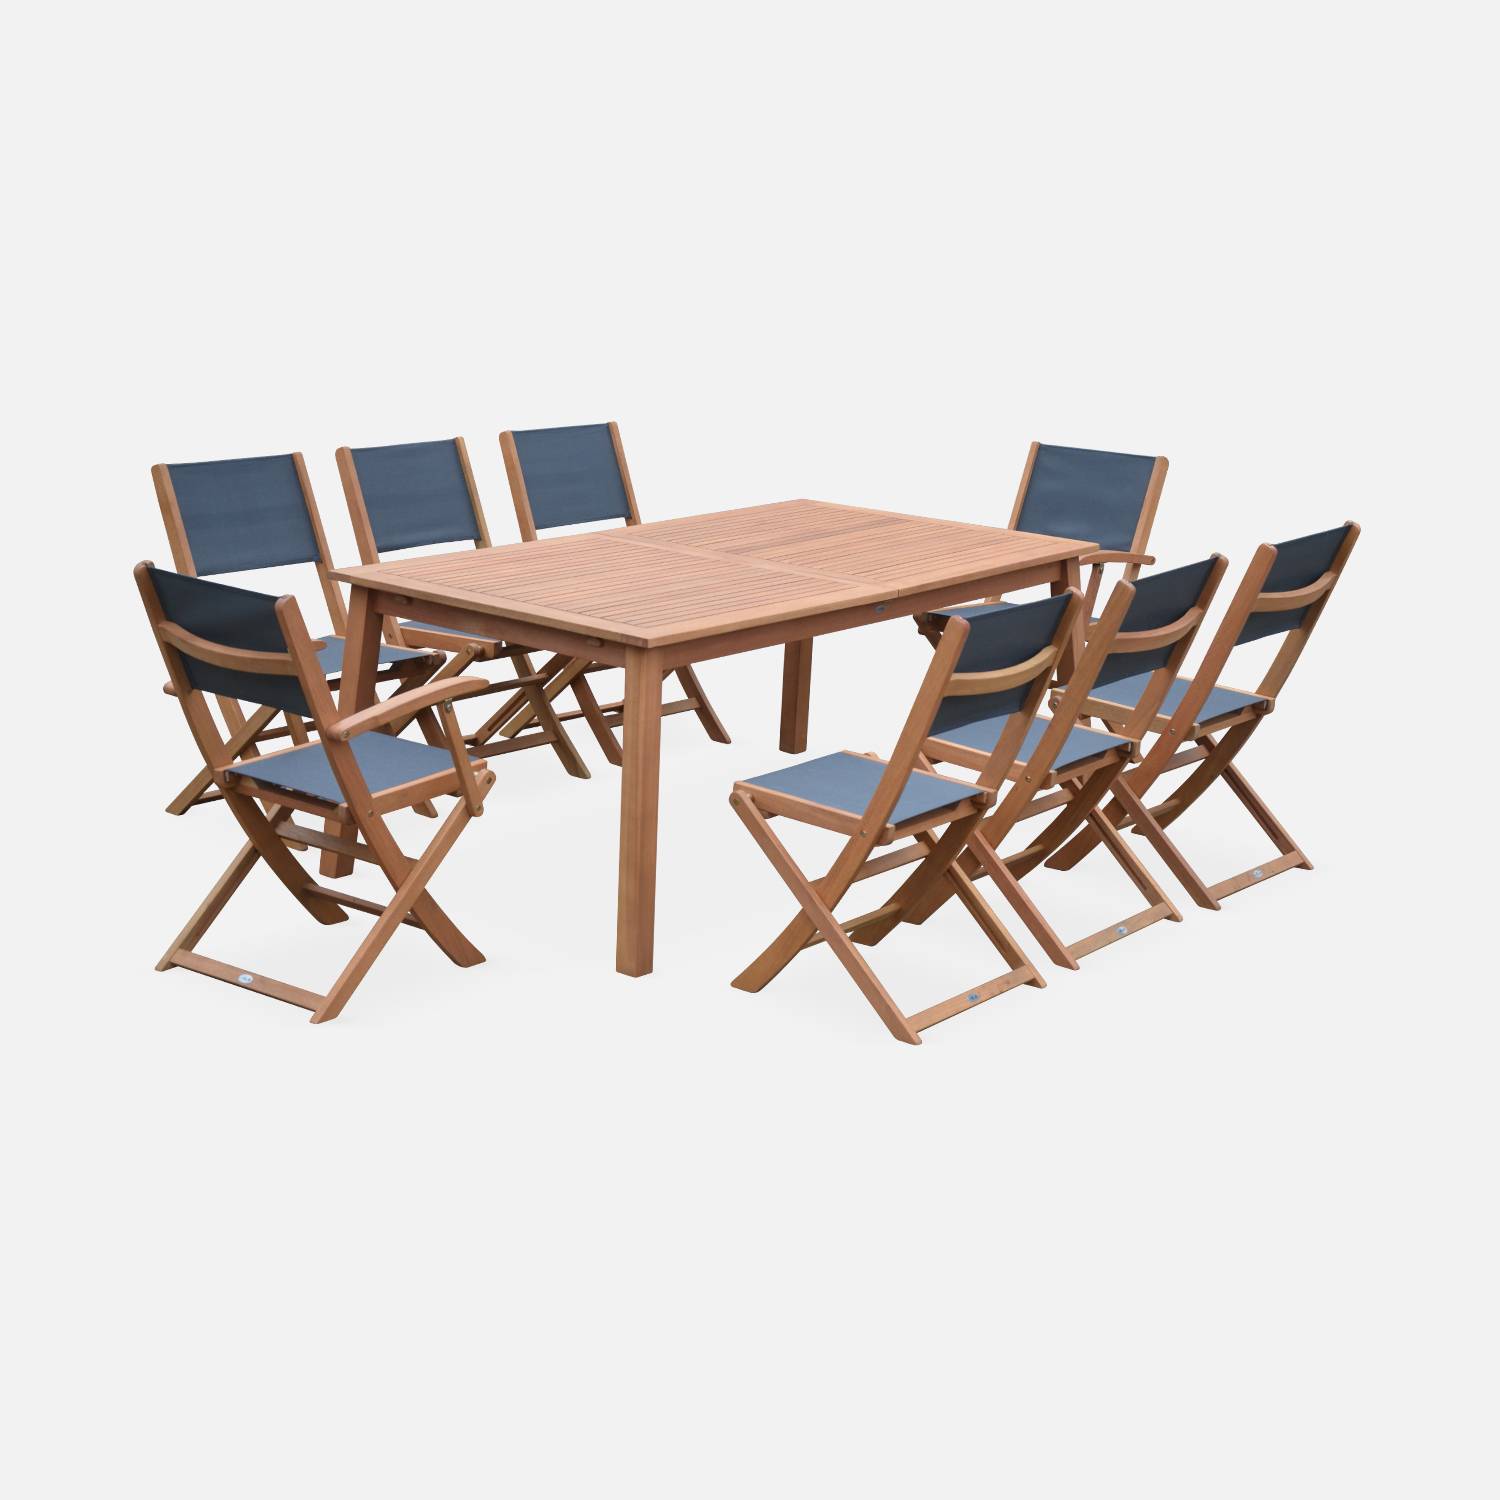 8-seater garden dining set, extendable 180-240cm FSC-eucalyptus wooden table, 6 chairs and 2 armchairs - Almeria 8 - Anthracite textilene seats Photo4